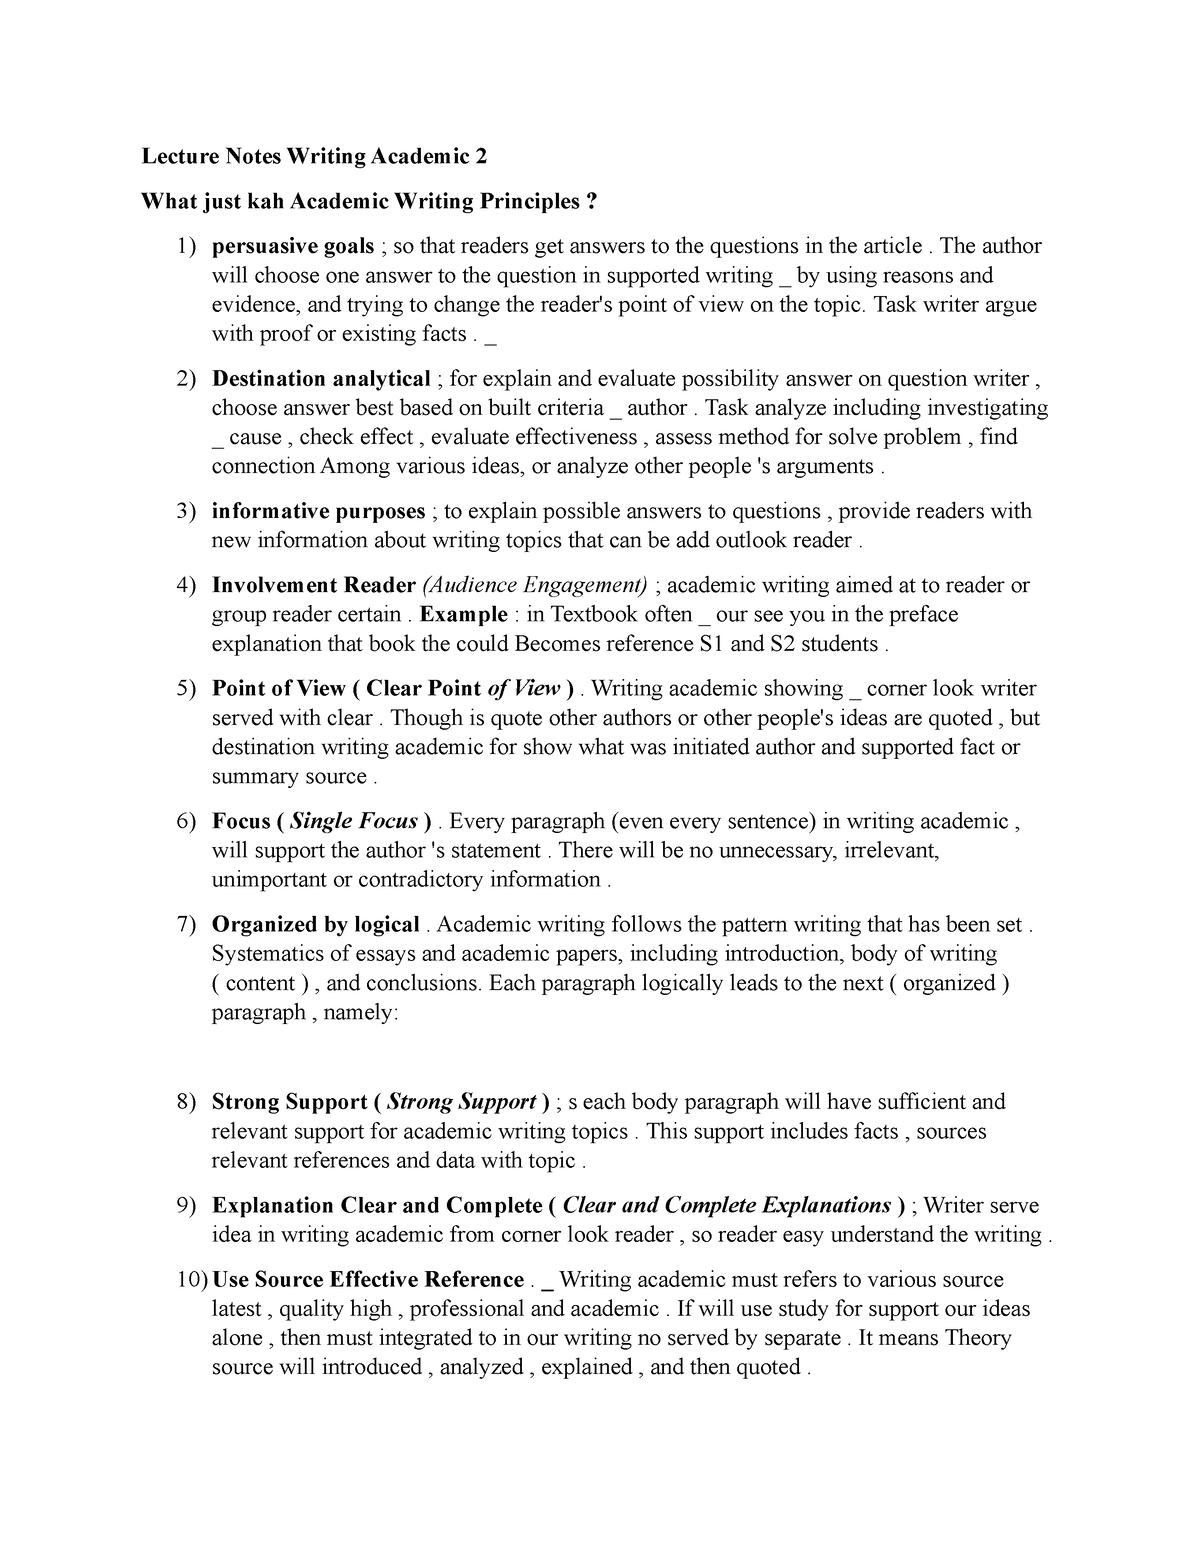 Lecture Notes Writing Academic 2 eng vers - Lecture Notes Writing ...